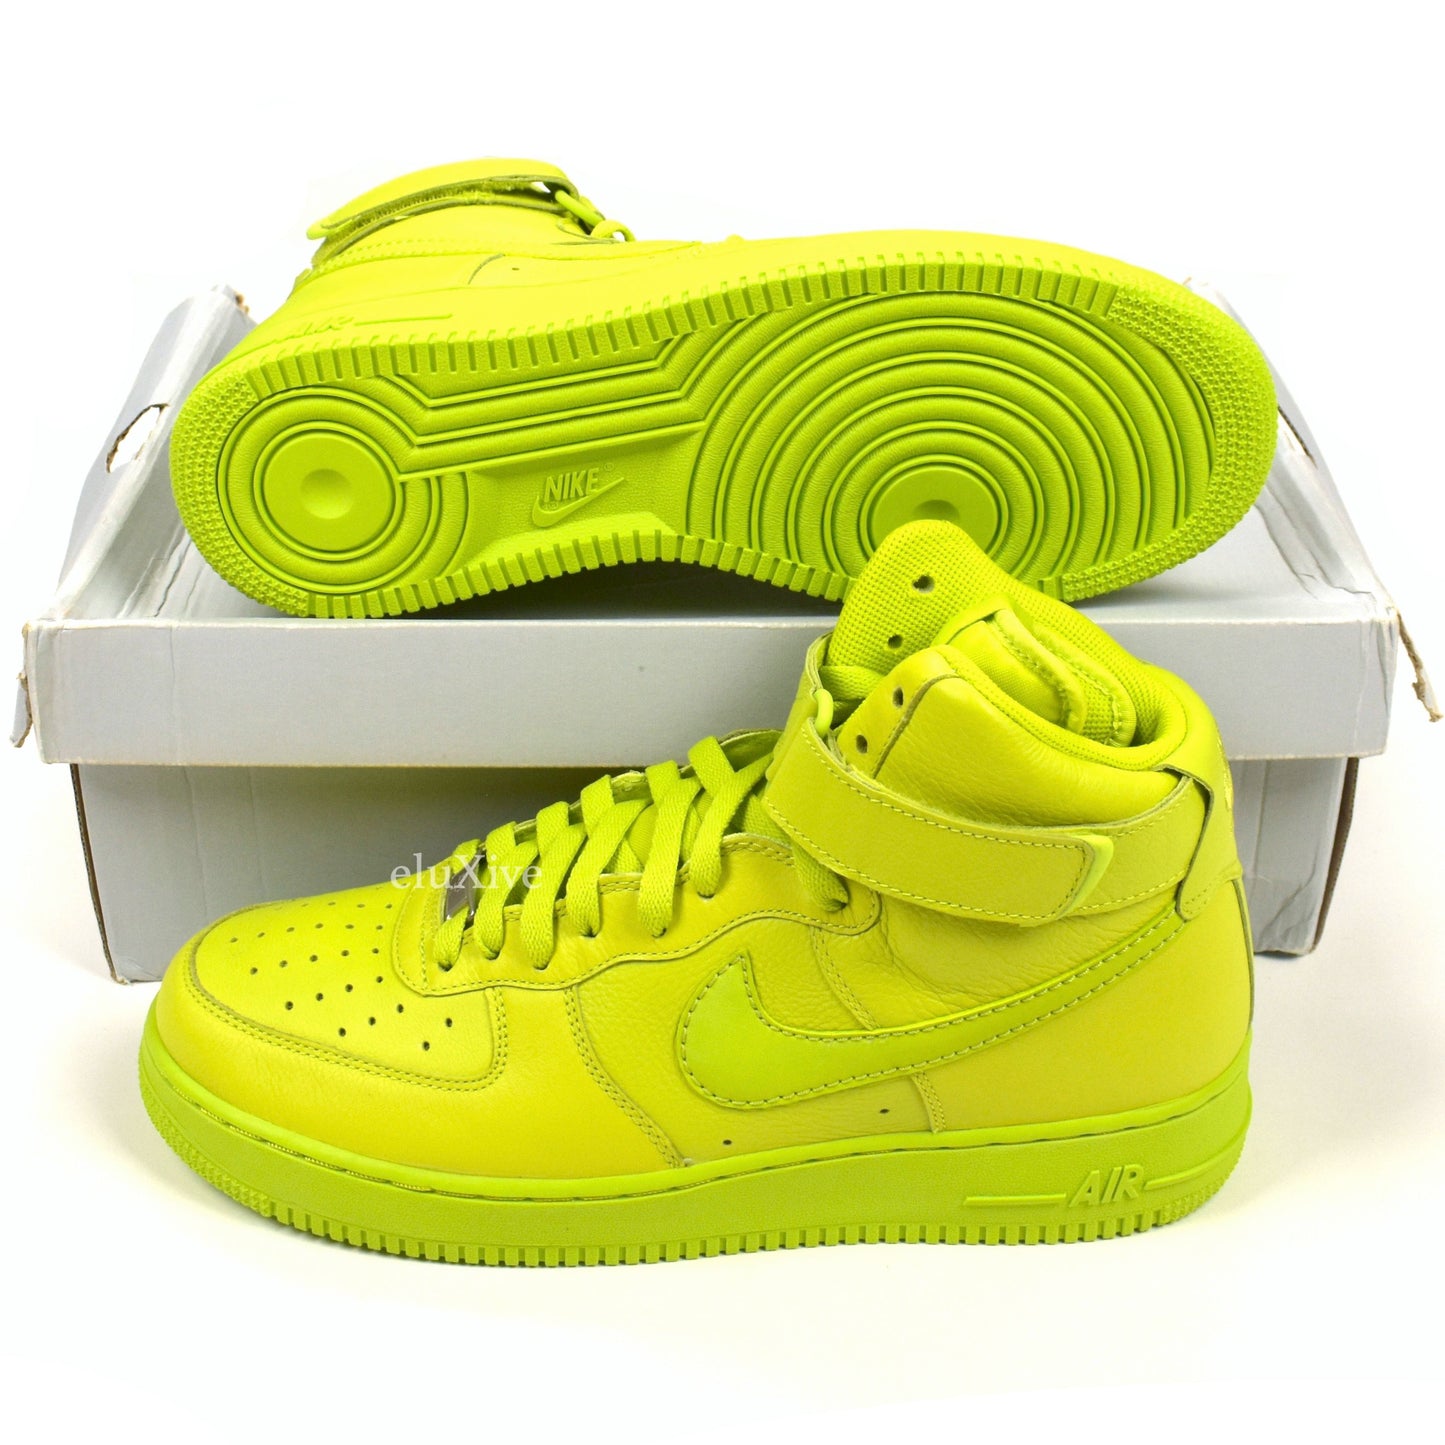 Nike - Air Force 1 High Color Pack 2008 (Bright Cactus)